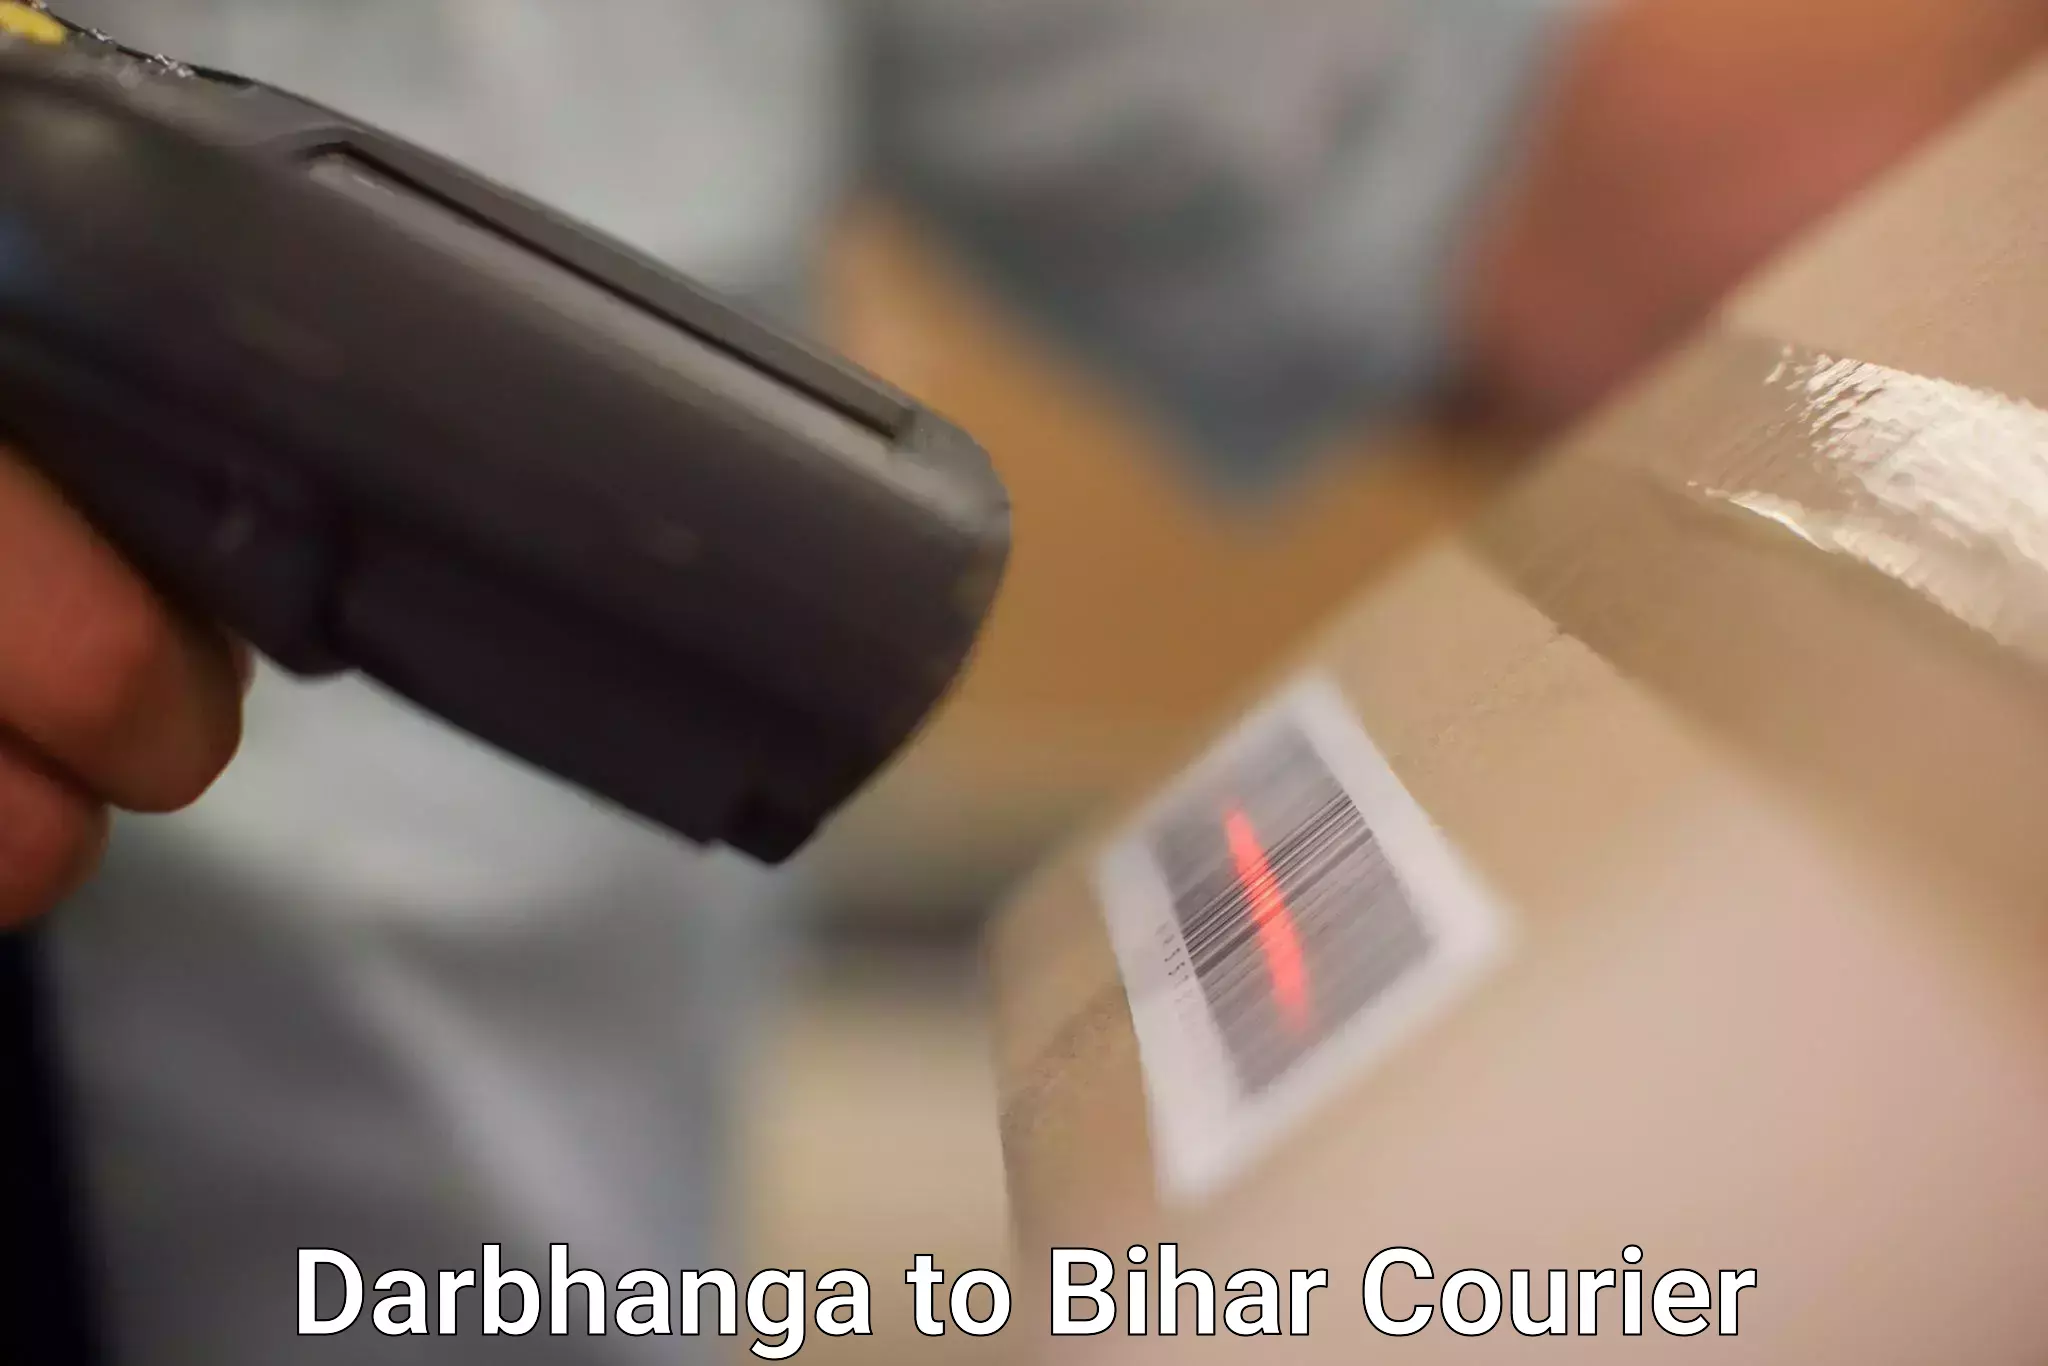 Courier service booking in Darbhanga to Mohania